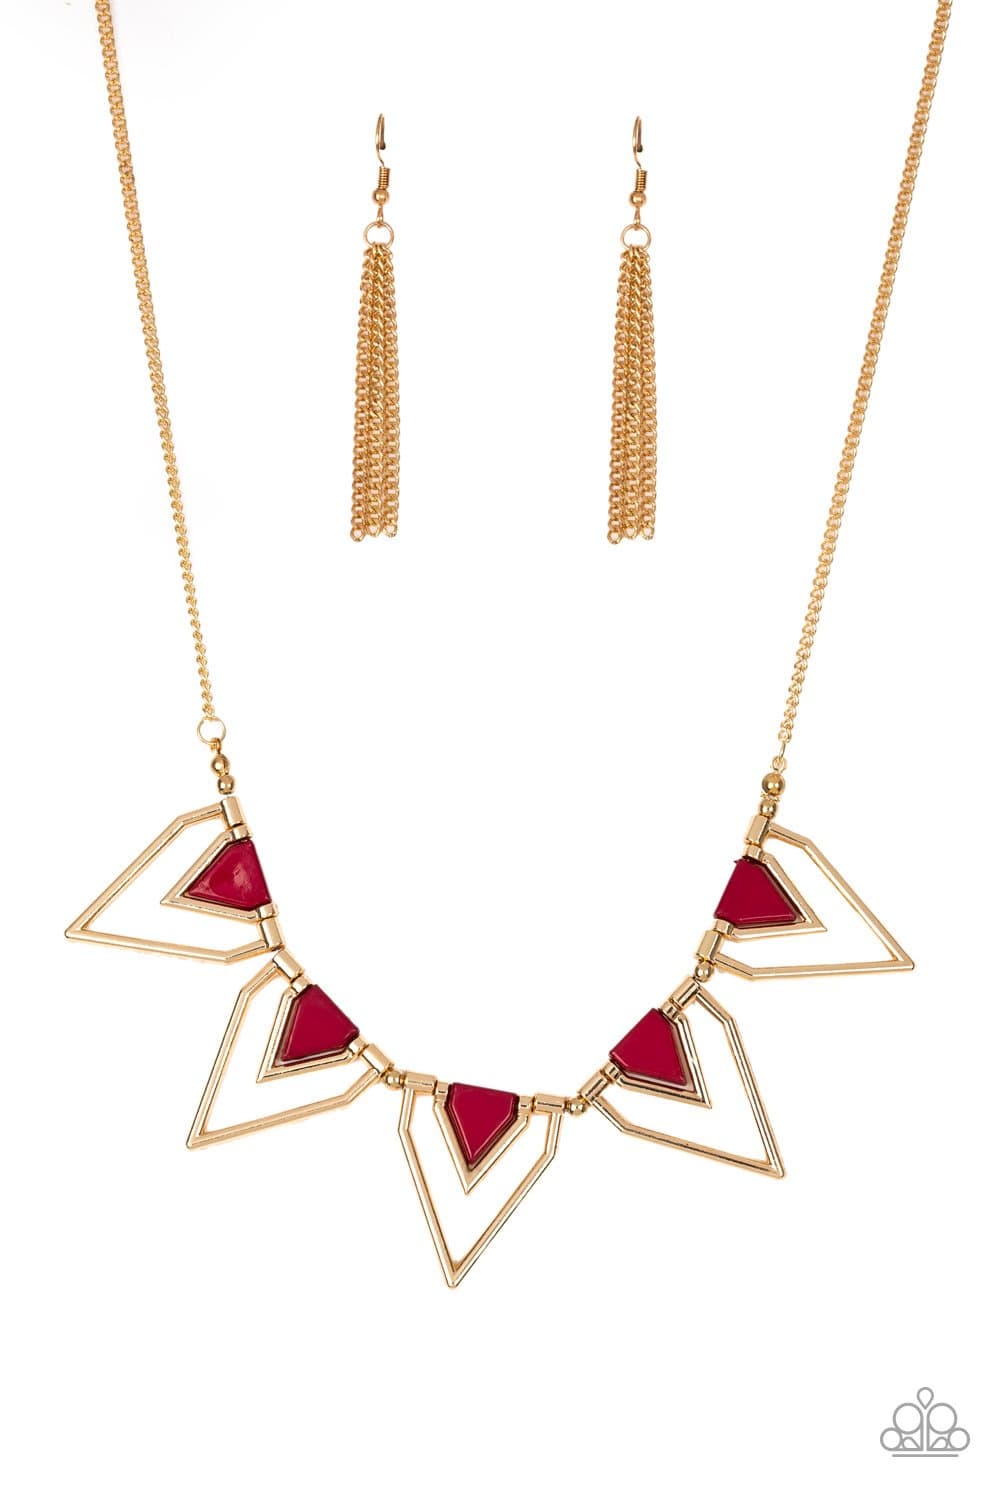 A152 - The Pack Leader Red Necklace by Paparazzi Accessories on Fancy5Fashion.com